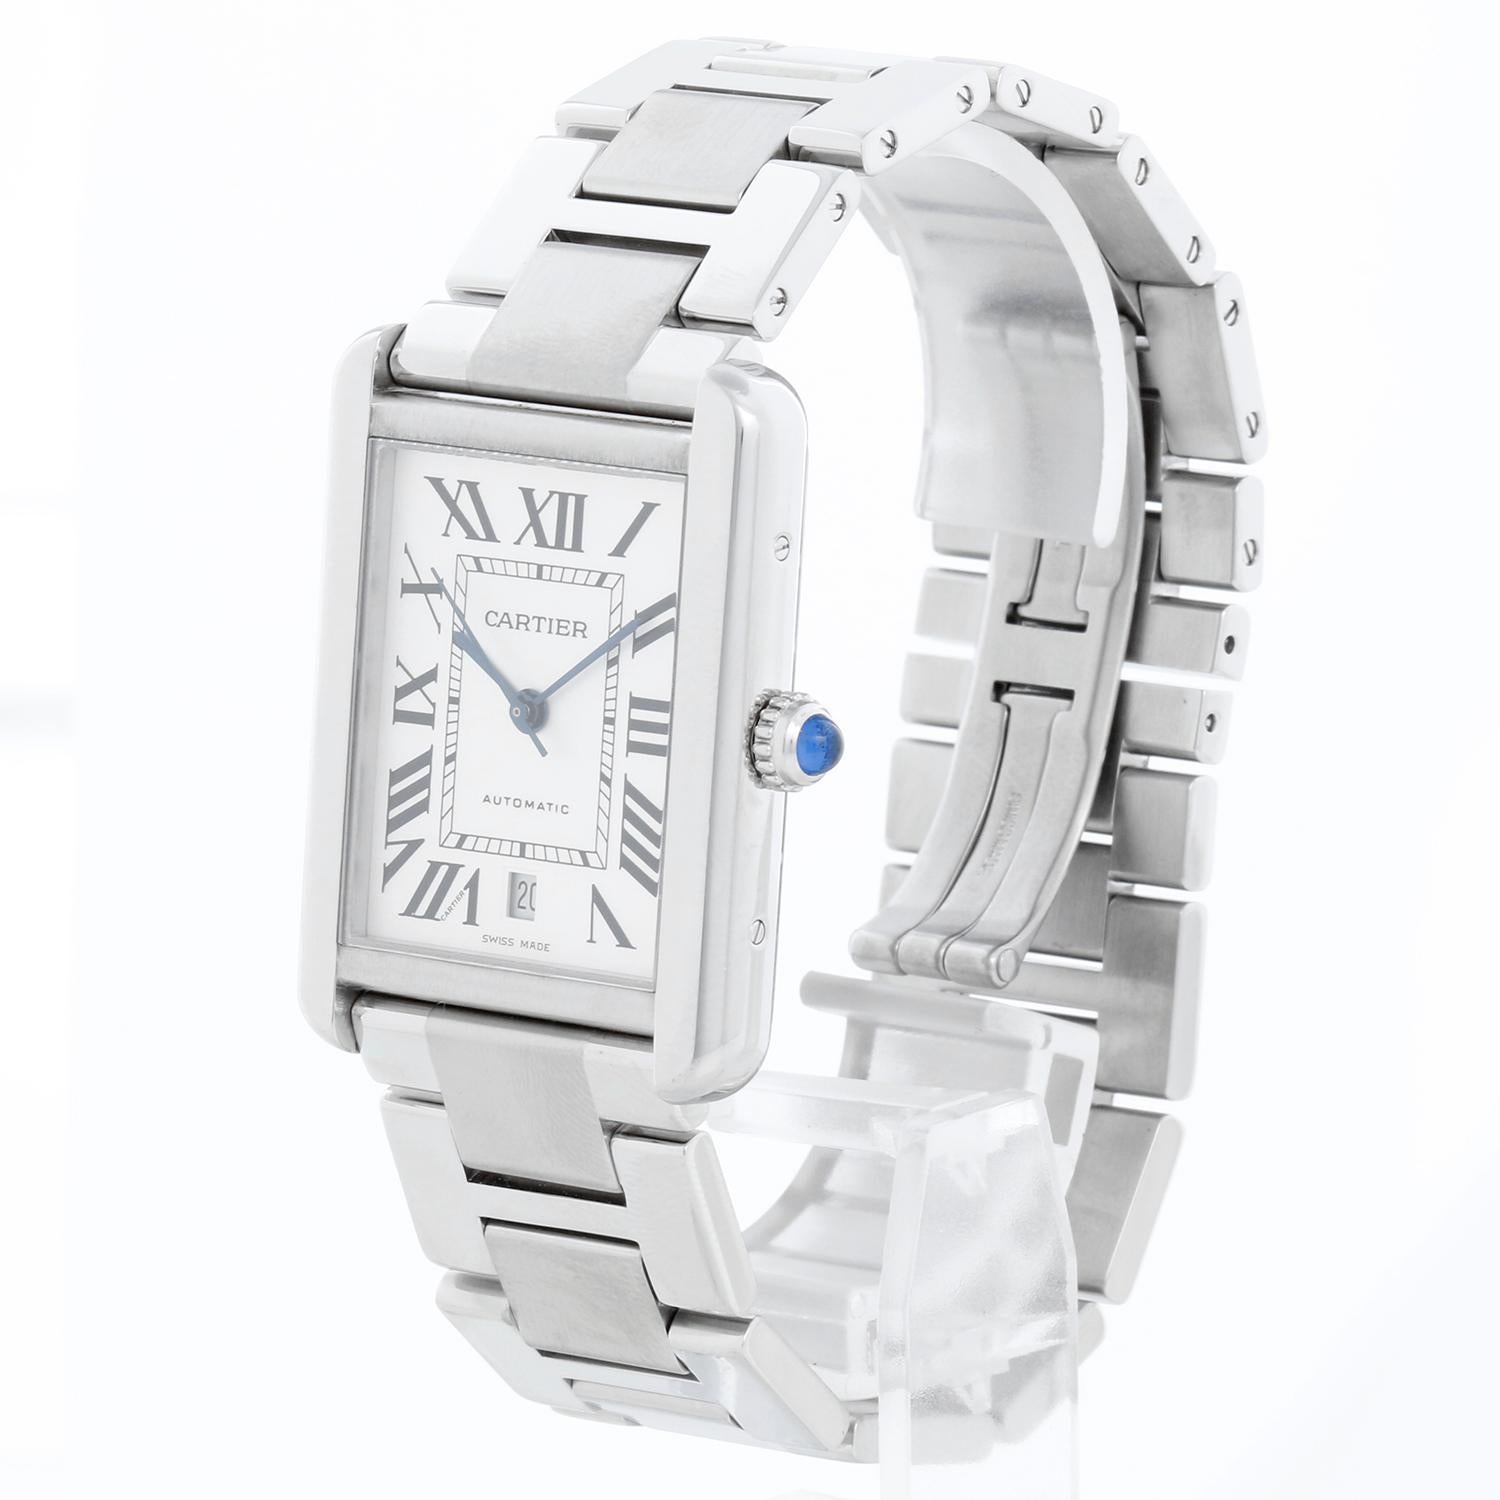 Cartier Tank Solo Stainless Steel XL W5200028 3800 - Automatic. Stainless steel  (31 x 41mm). Silver dial with black Roman numerals with date at 6 o'clock. Stainless Steel Cartier bracelet; fit 7 1/4